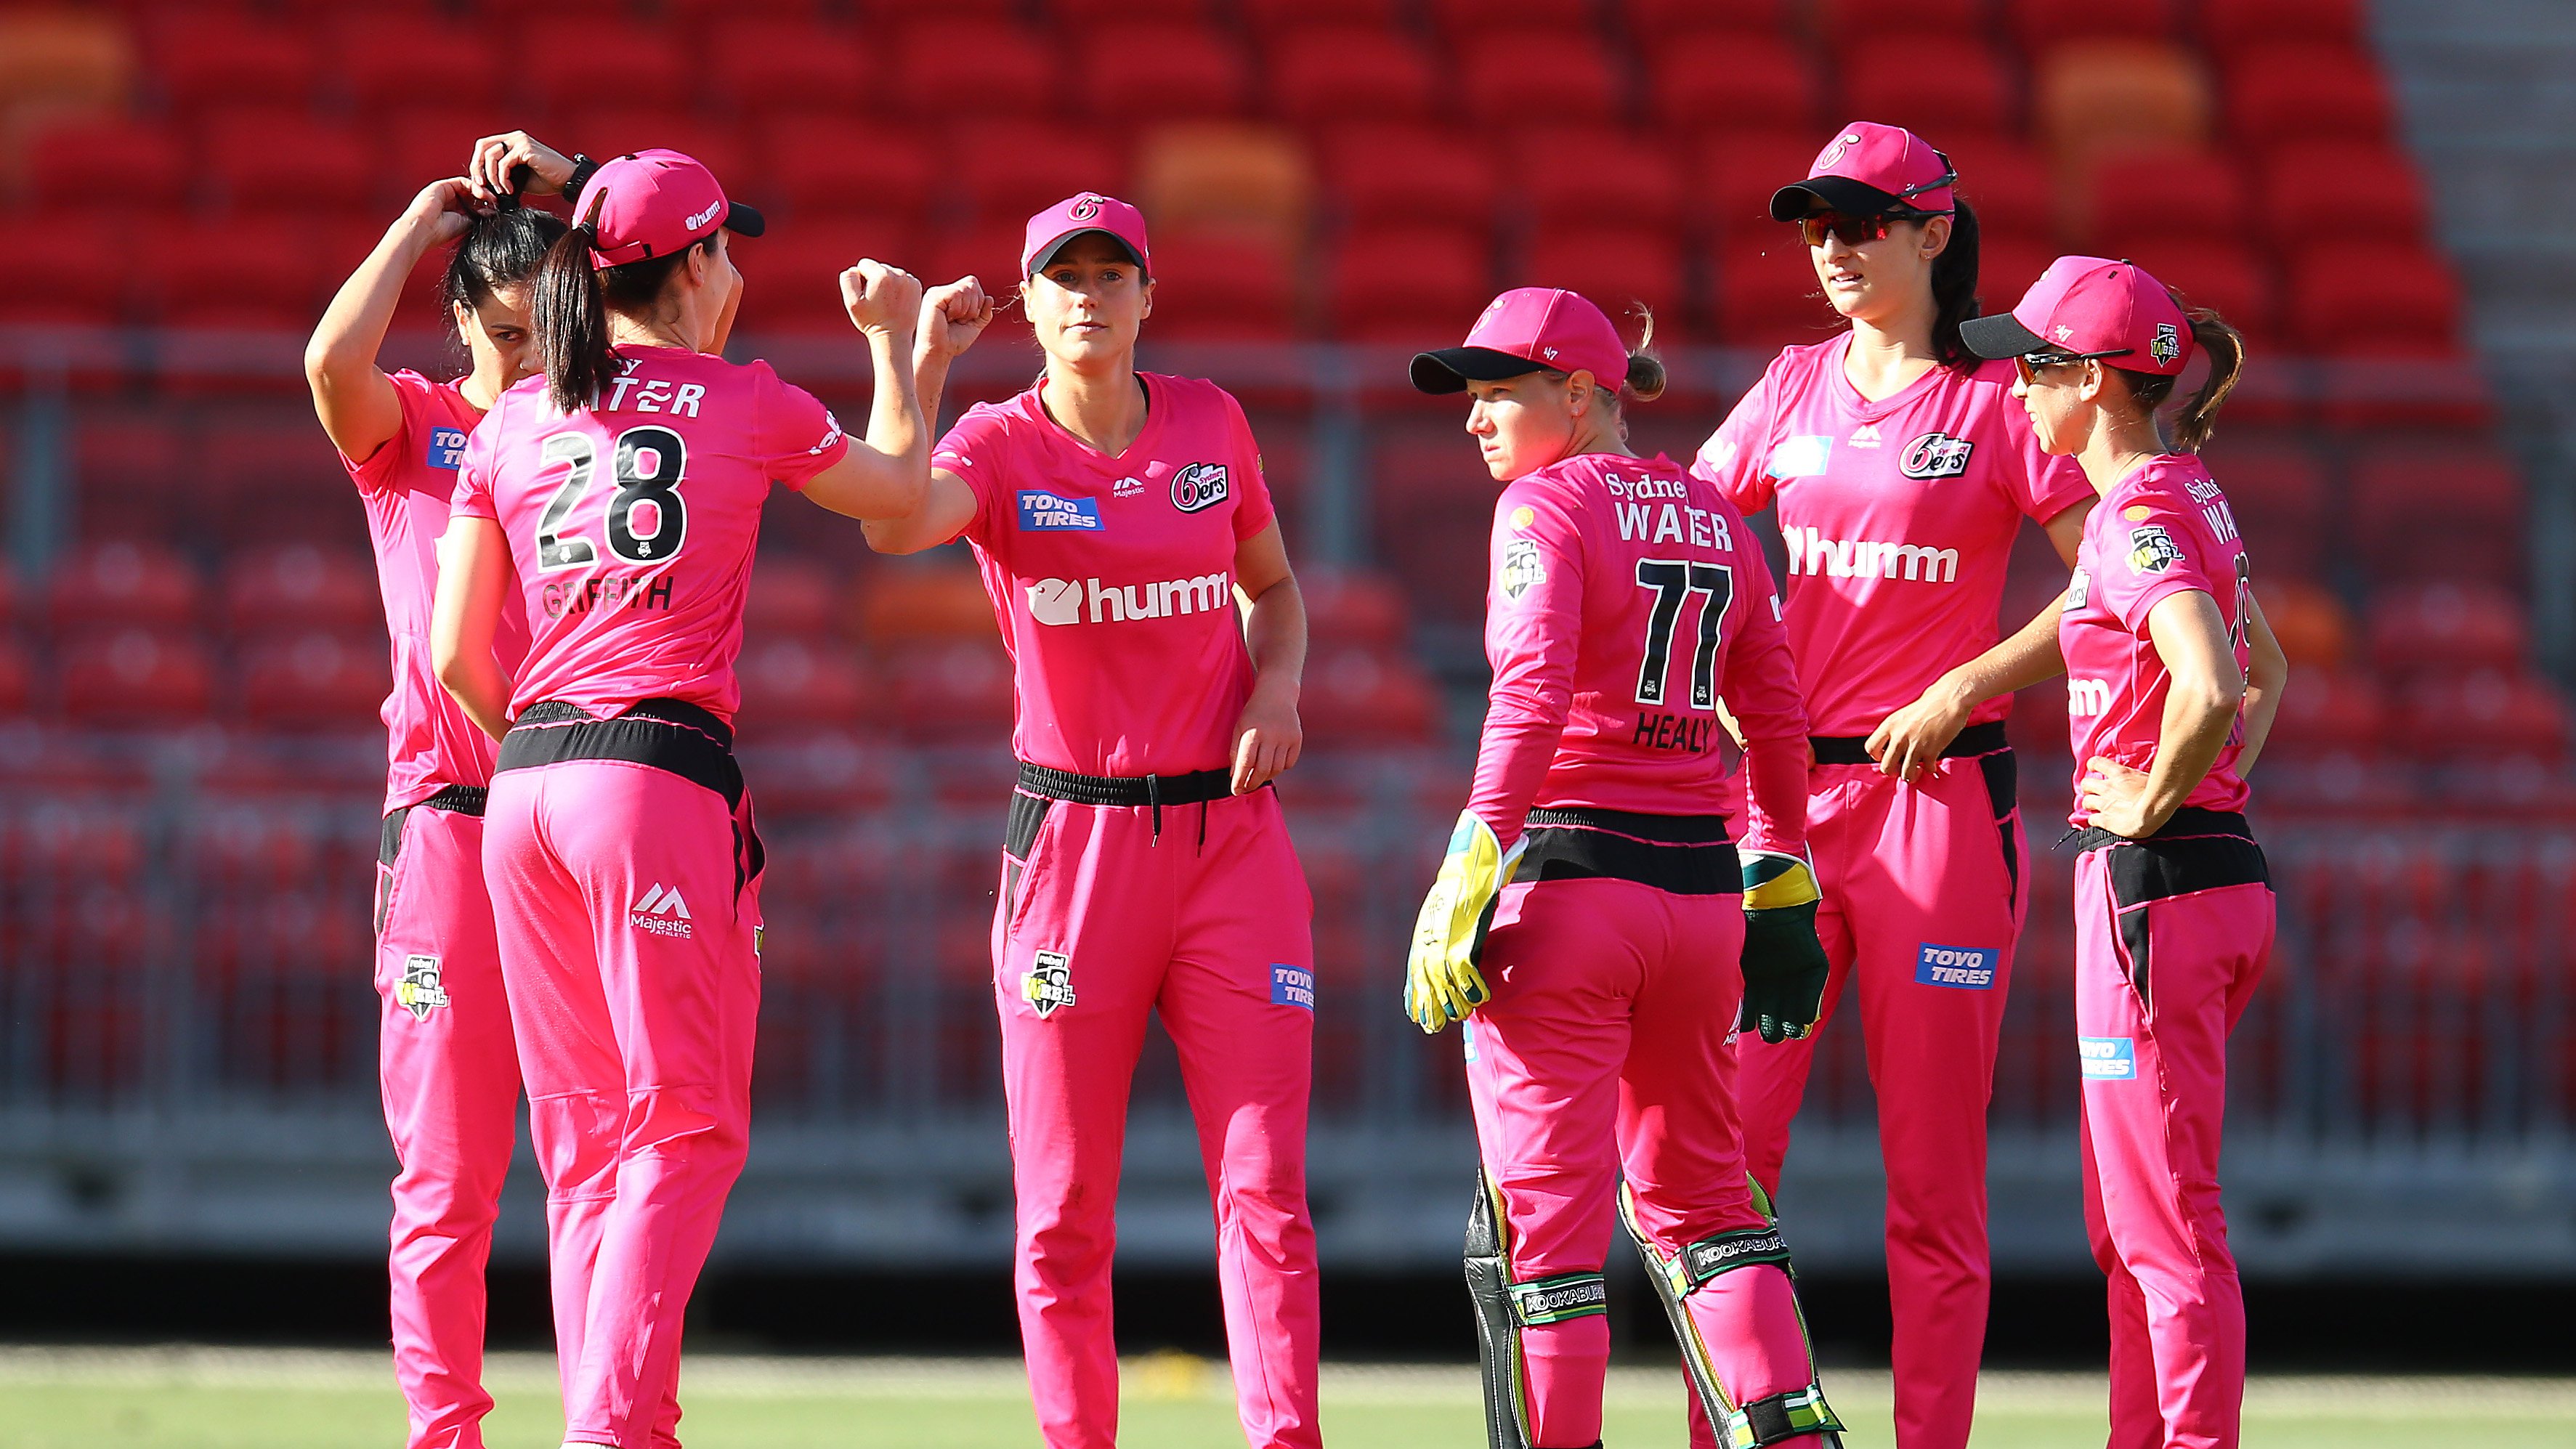 WBBL: Sydney Sixers fined $25,000 for naming wrong player on team sheet